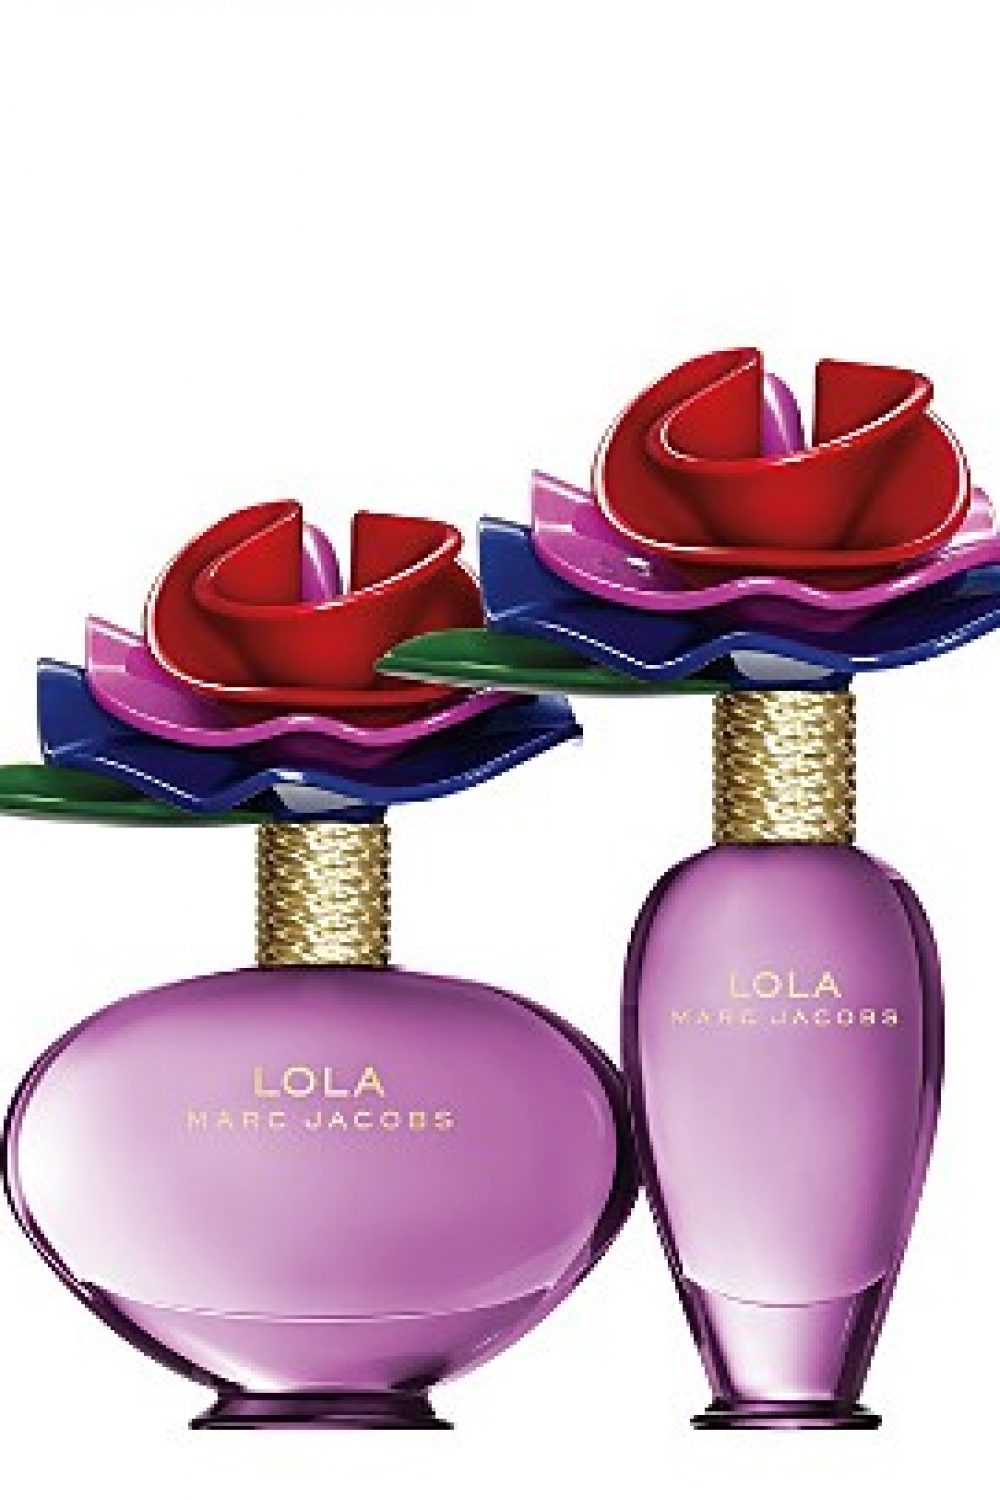 Lola is for (Fragrance!) Lovers